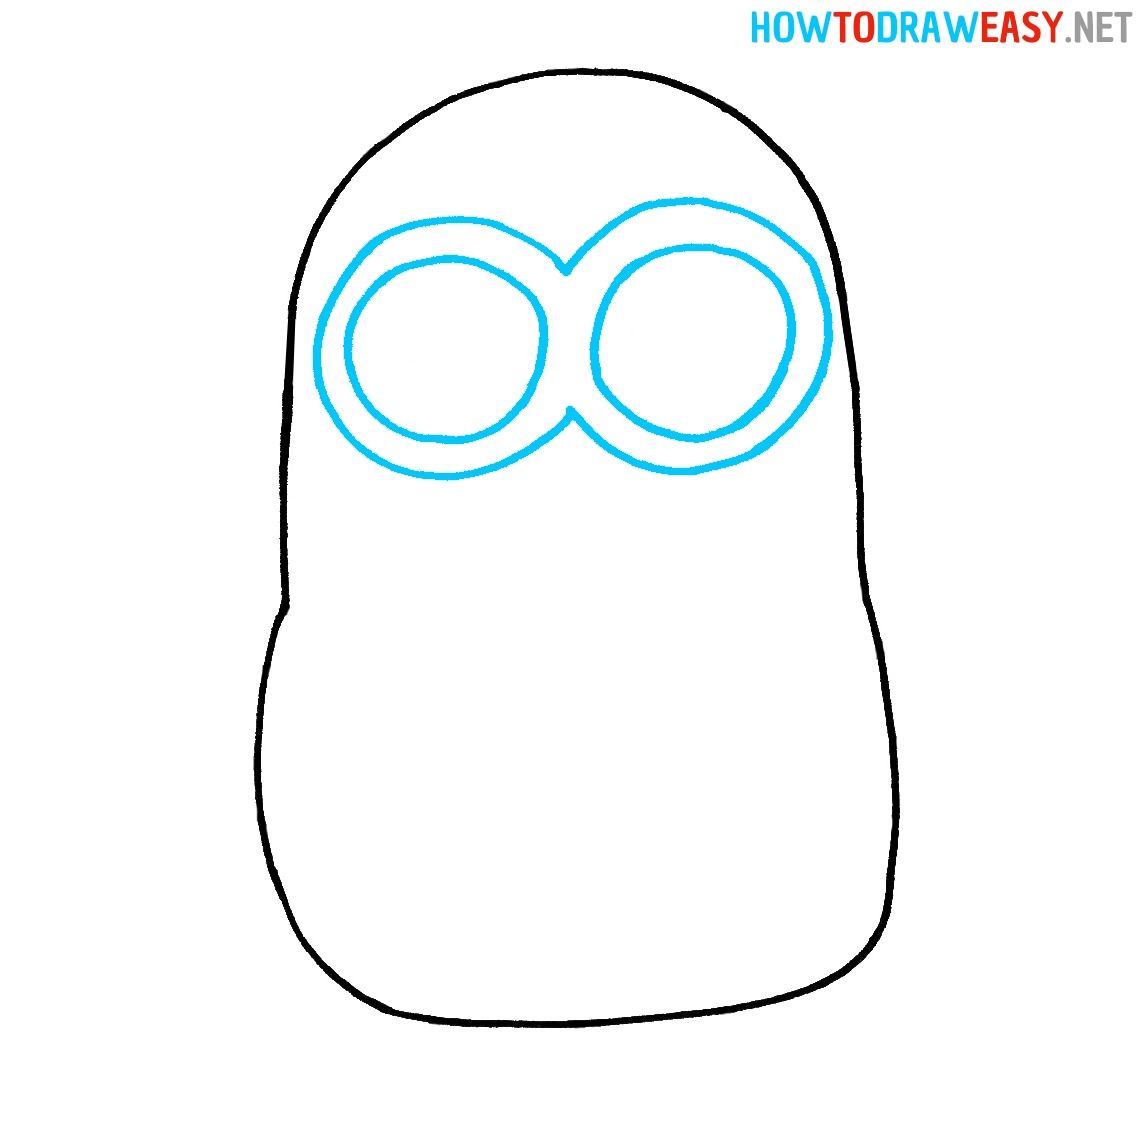 How to Draw an Easy Minion